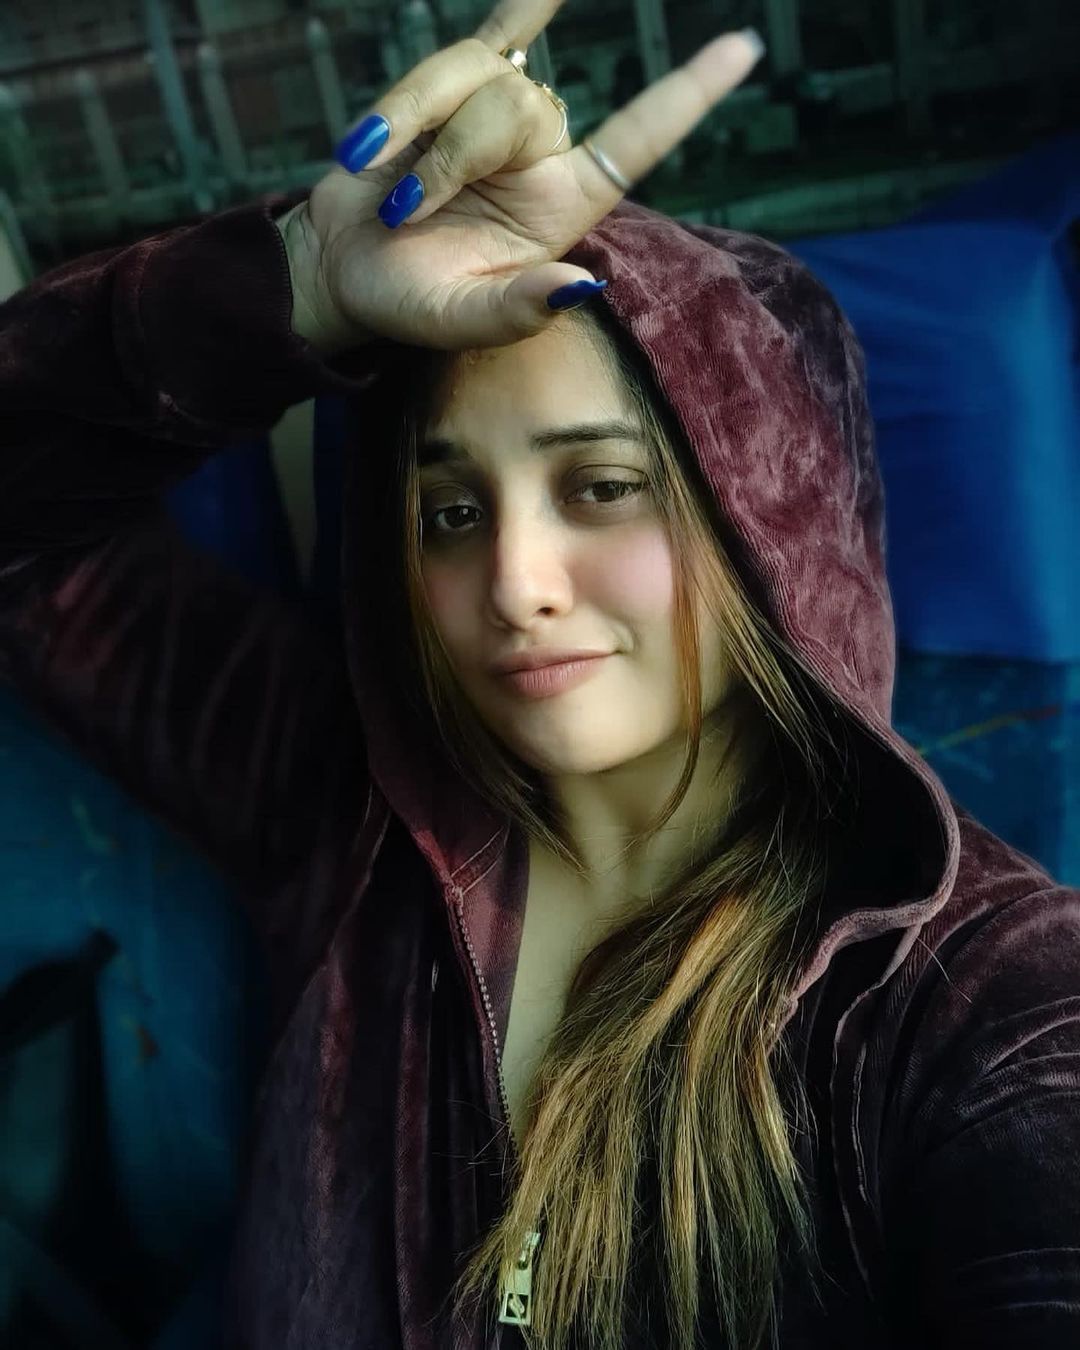 Rani Chatterjee shares her glamorous beauty during train journey, see photos 6264